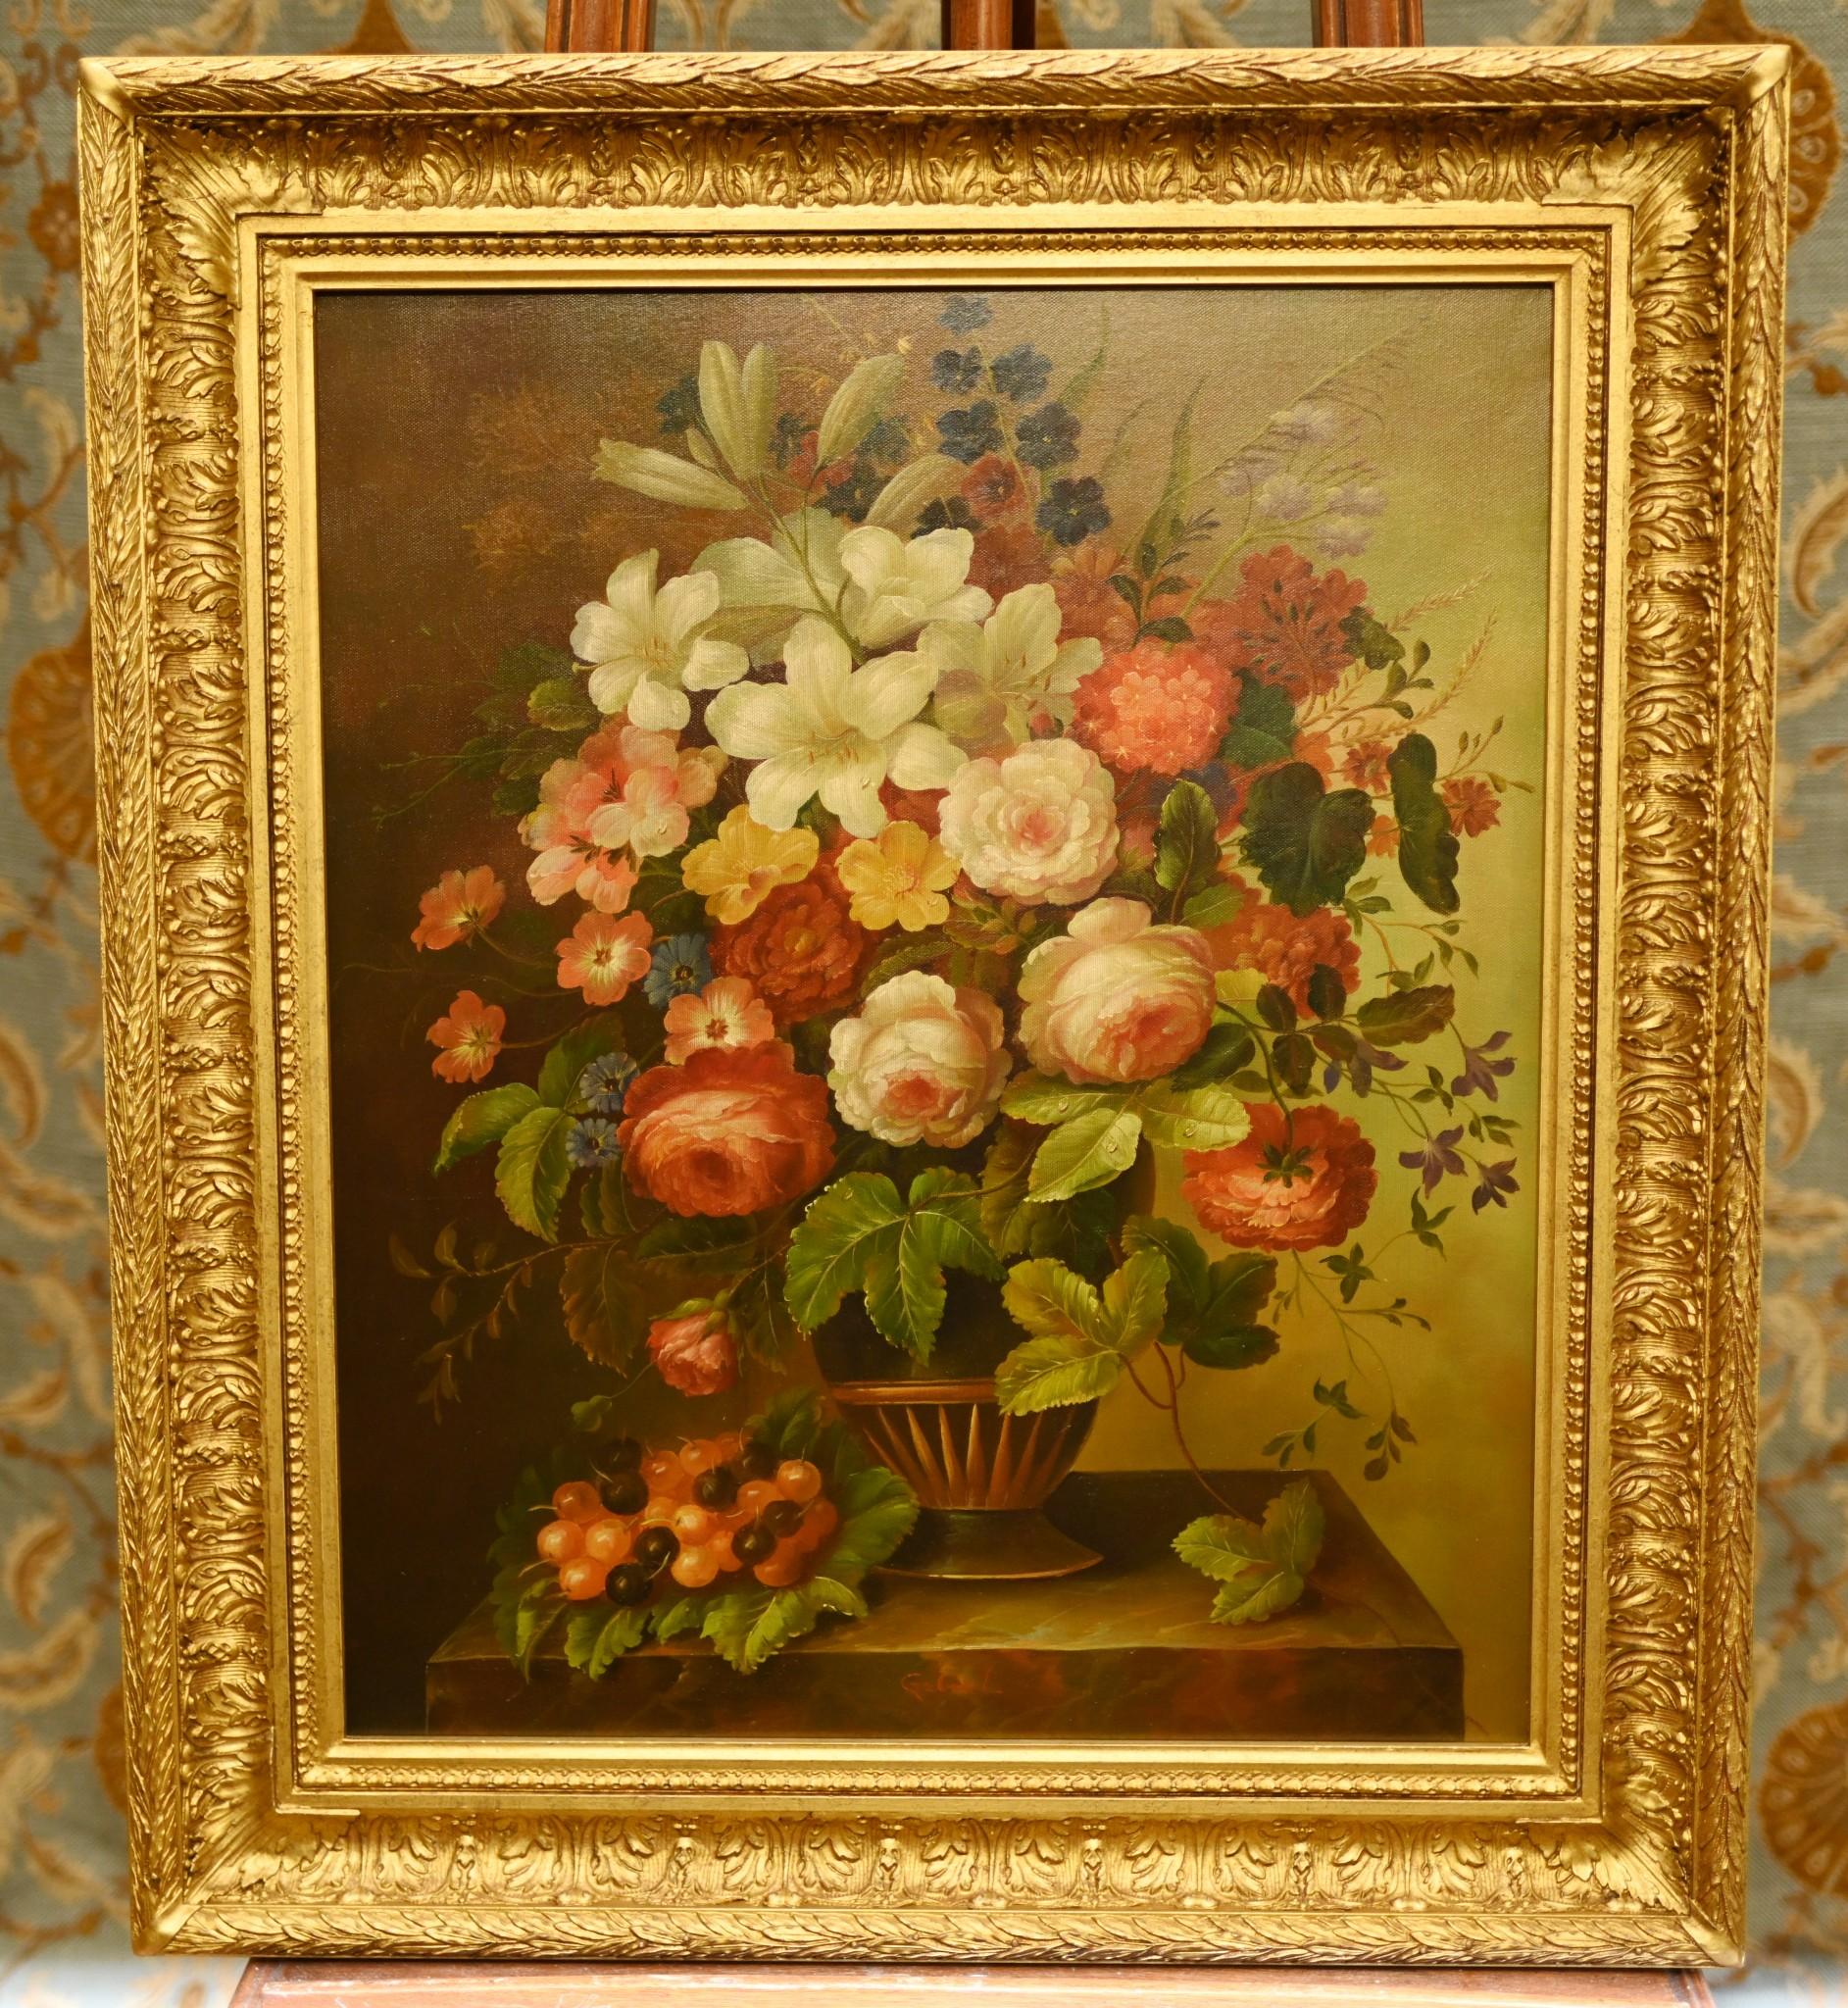 You are viewing a gorgeous floral still life oil painting in the Georgian manner
Such a vivid spray of bright flowers this will brighten up any room
Brush work so detailed and the choice of colours works so well Comes in the gilt frame ready to